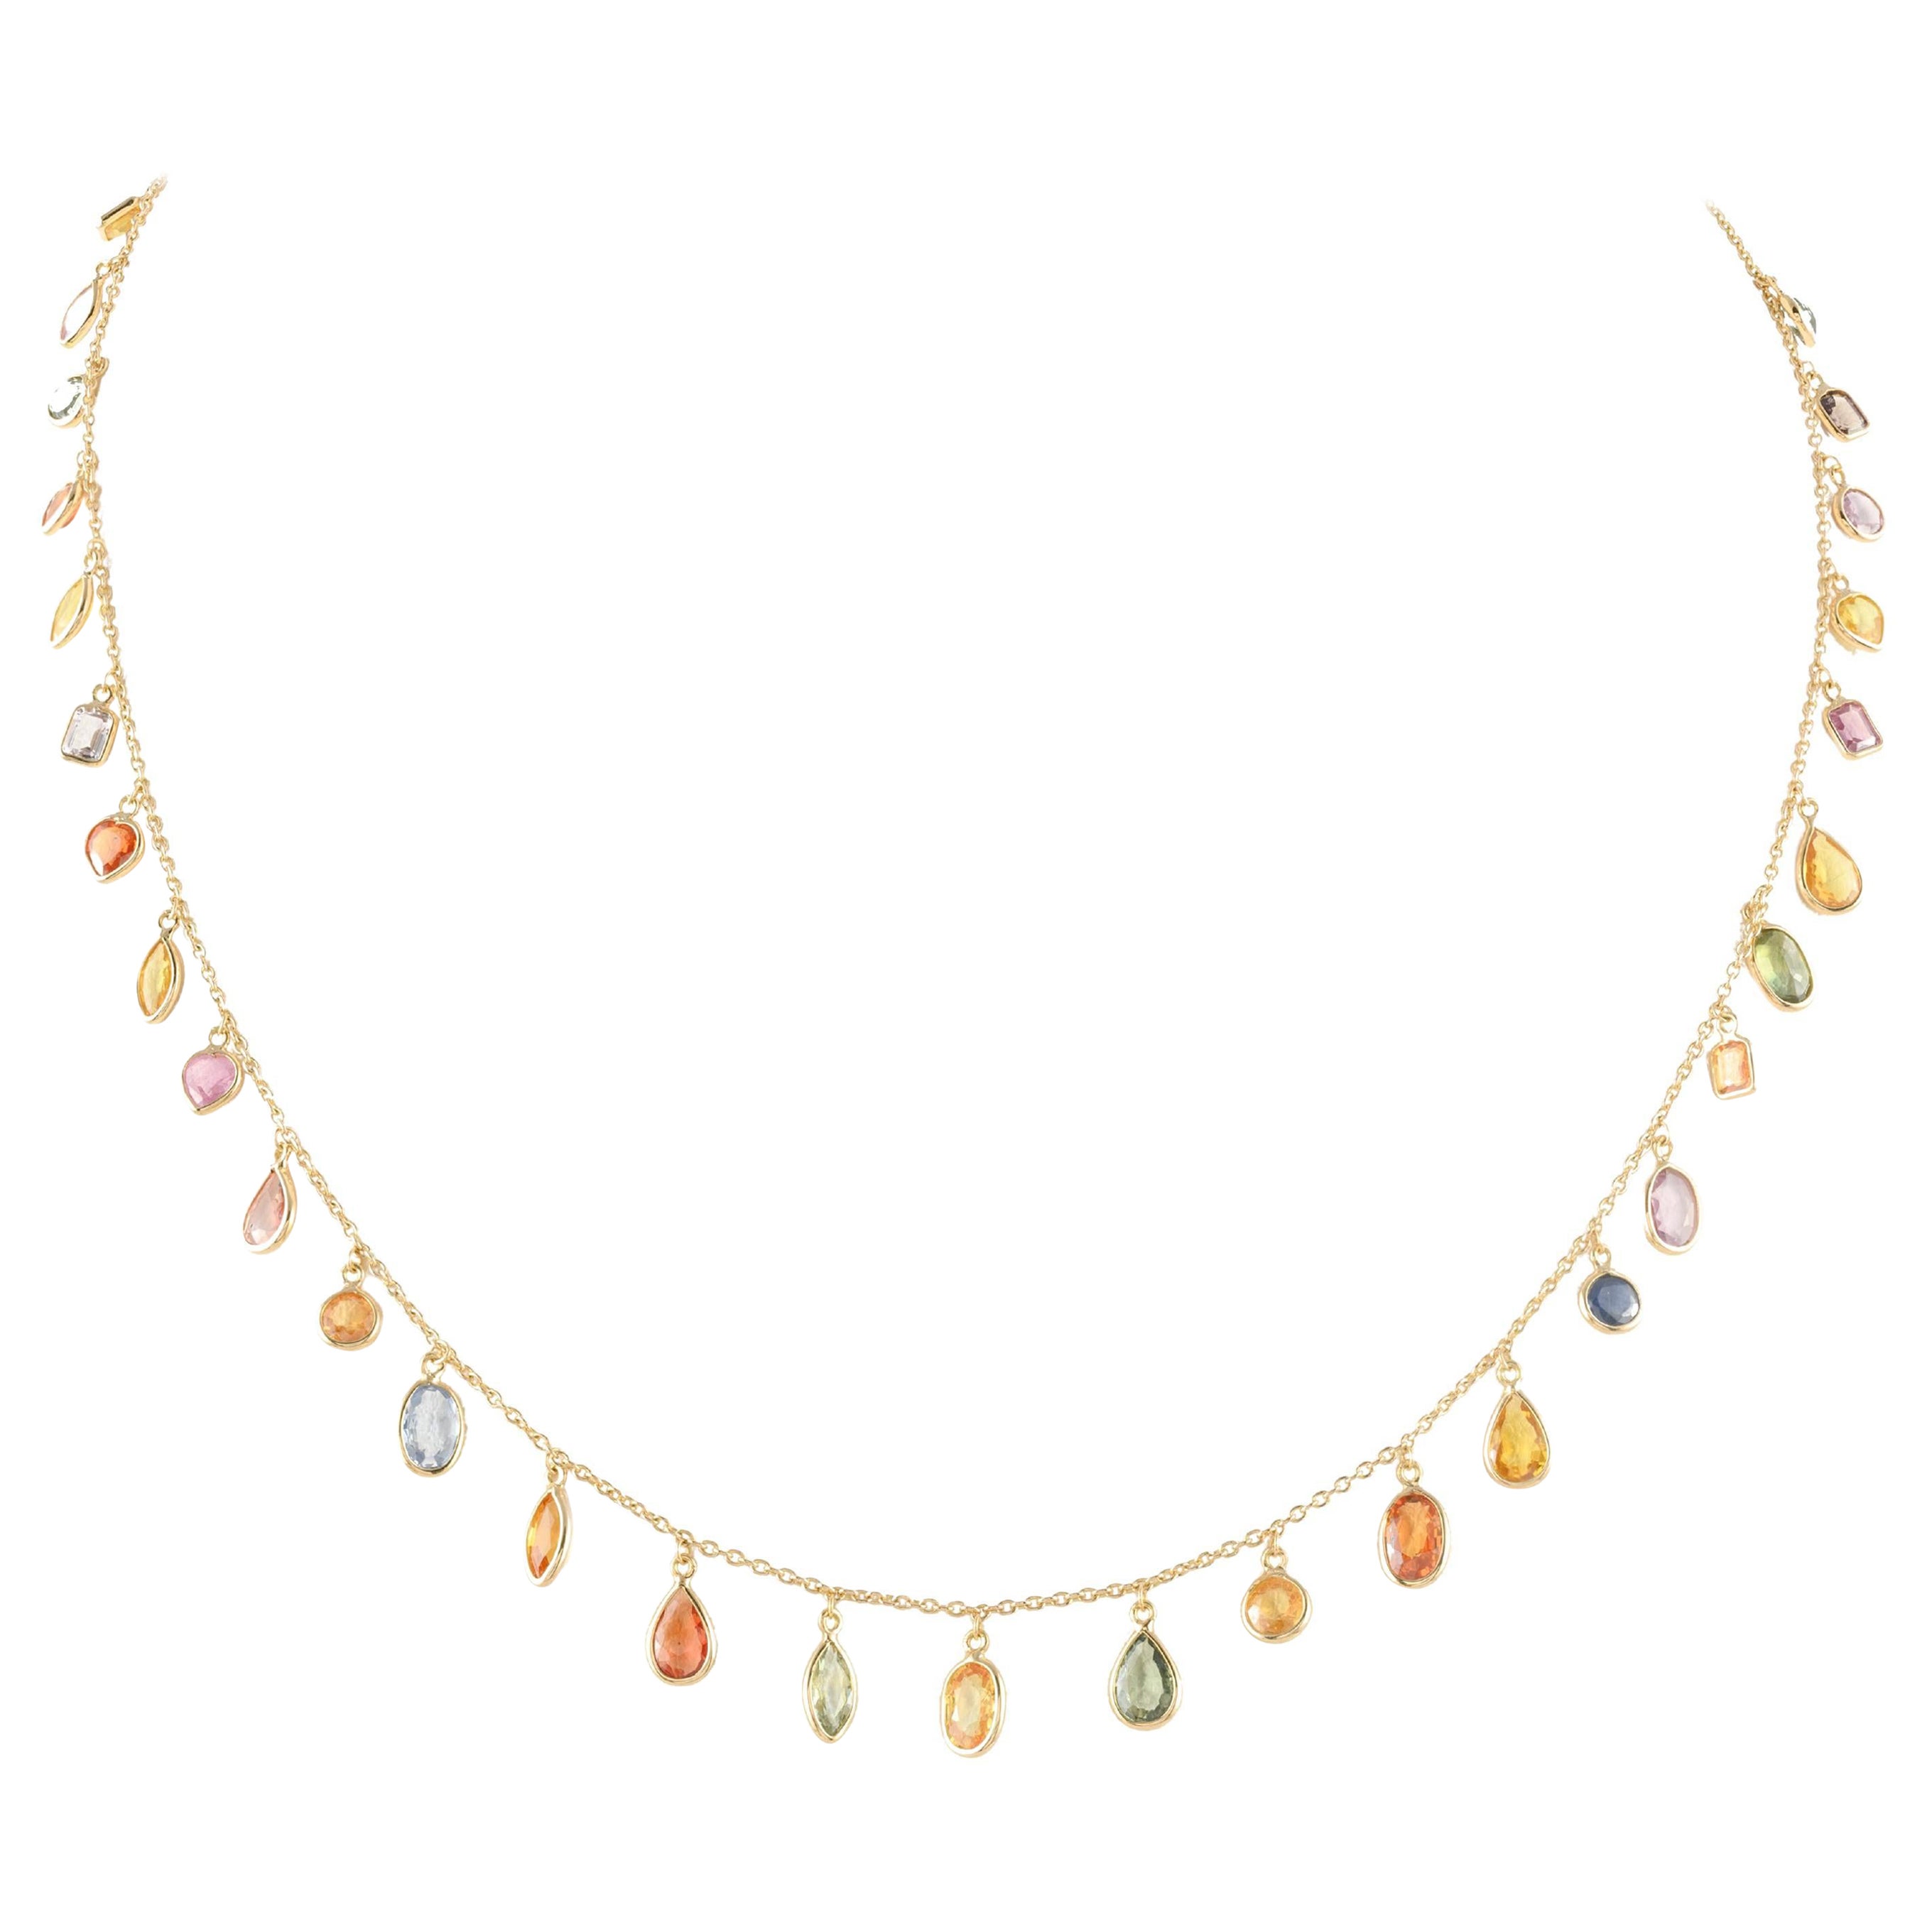 Colorful 18k Yellow Gold Dangling Multi Sapphire Chain Necklace, Bridesmaid Gift For Sale